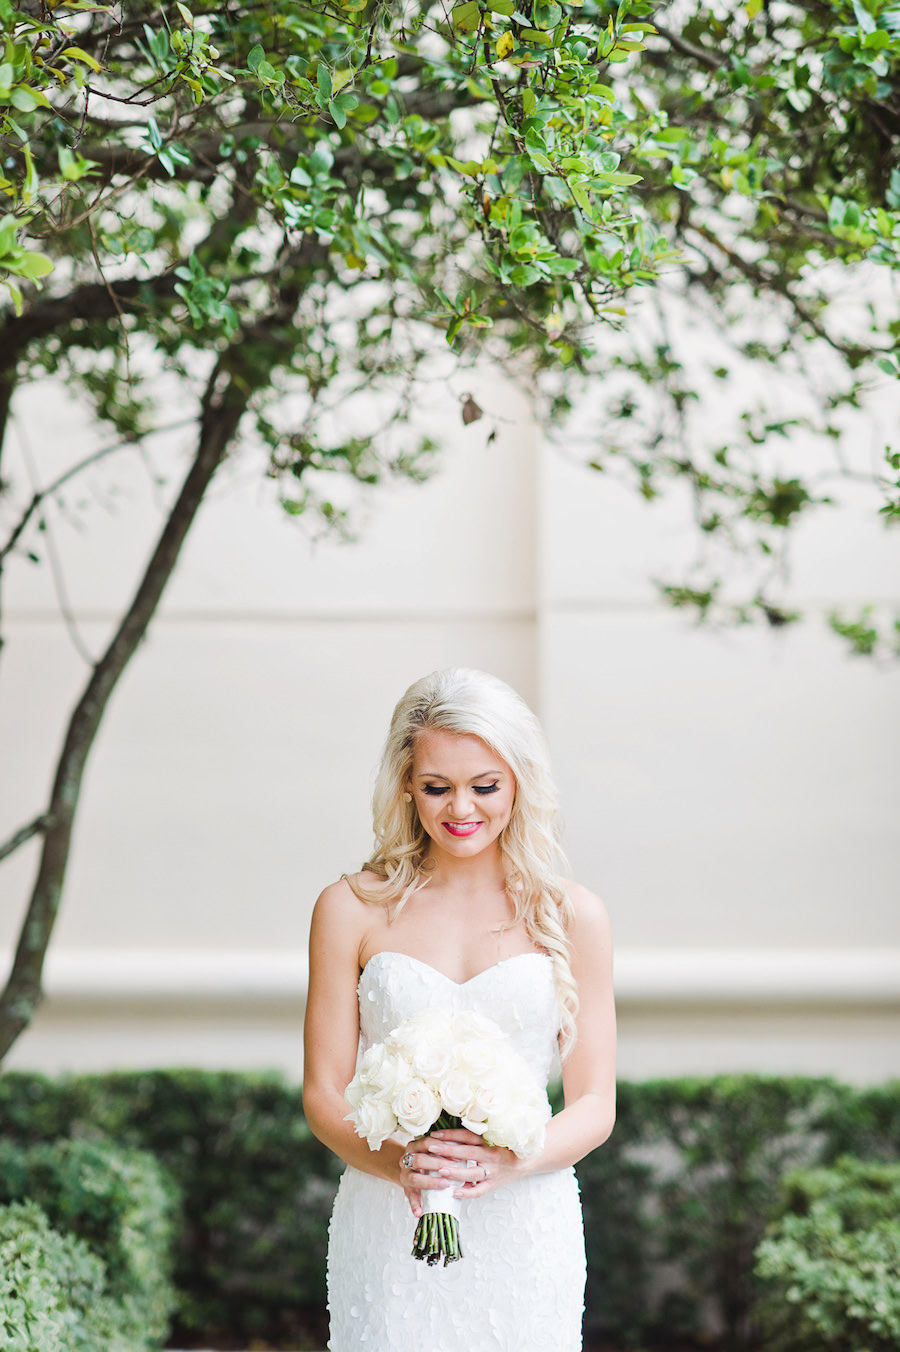 Outdoor, Bridal Portrait with Strapless Lis Simon Wedding Dress and White Floral Bridal Bouquet | Tampa Wedding Photographer Marc Edwards Photographs